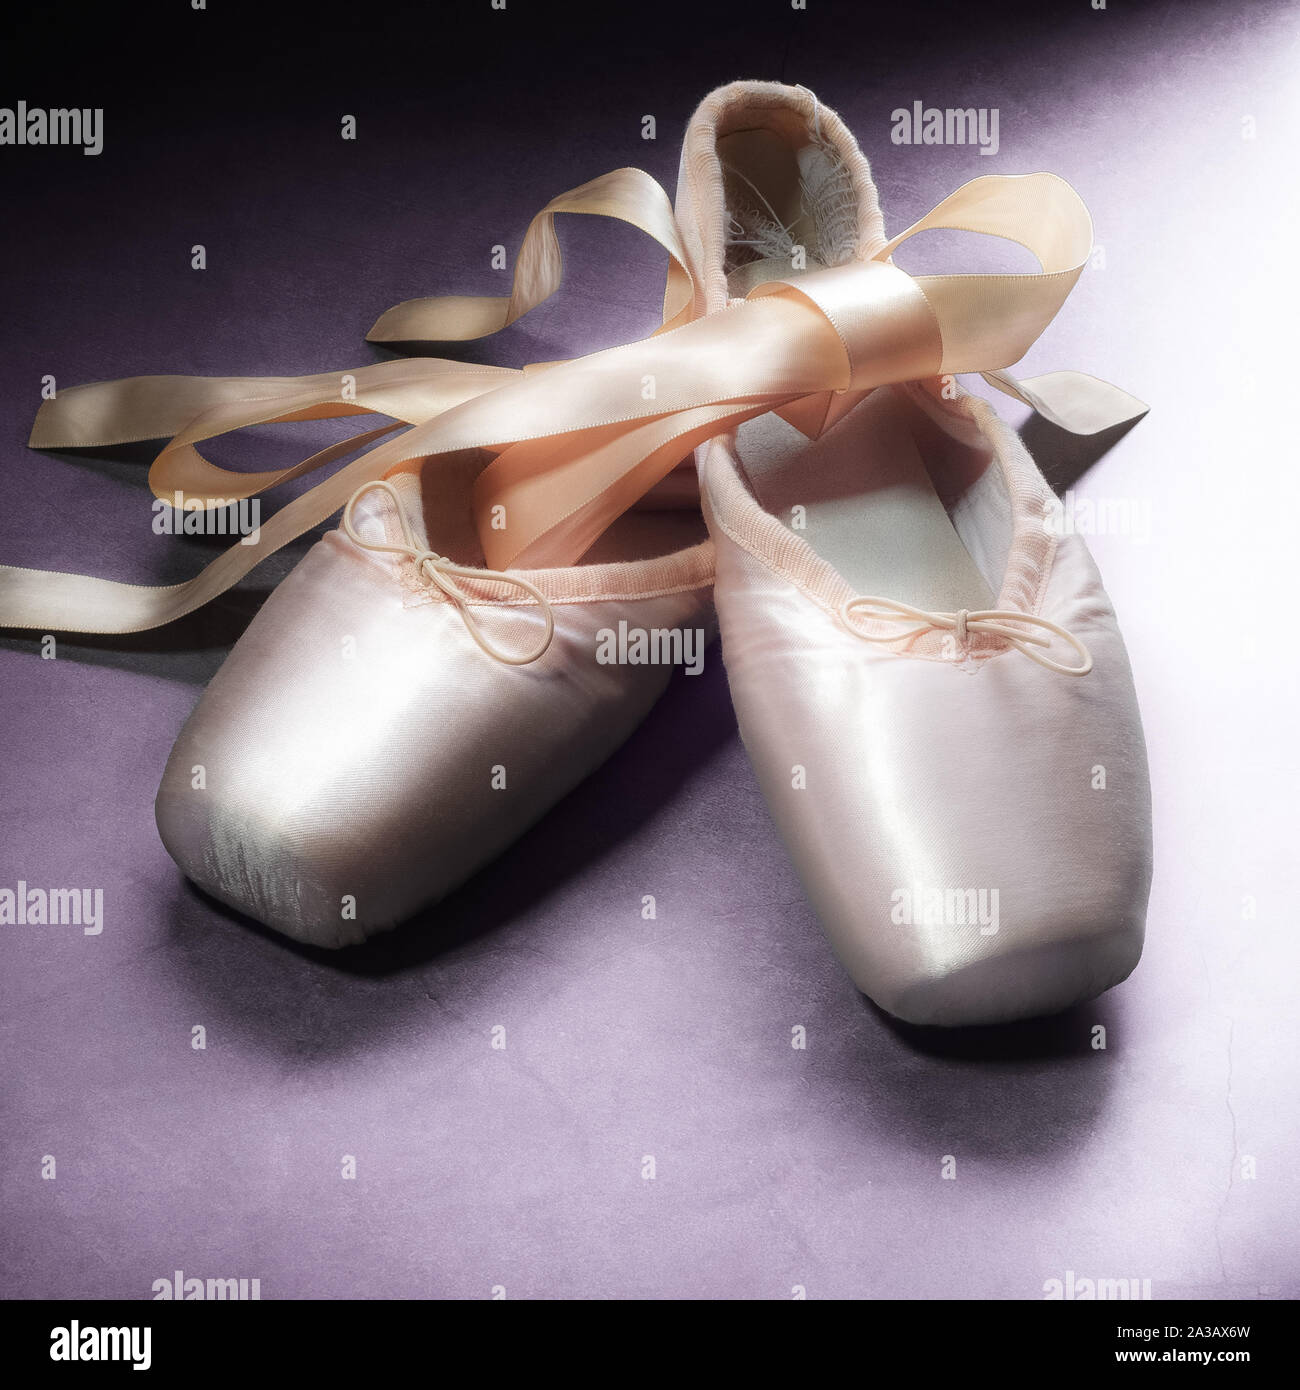 Pointe shoes ballet dance shoes with a 